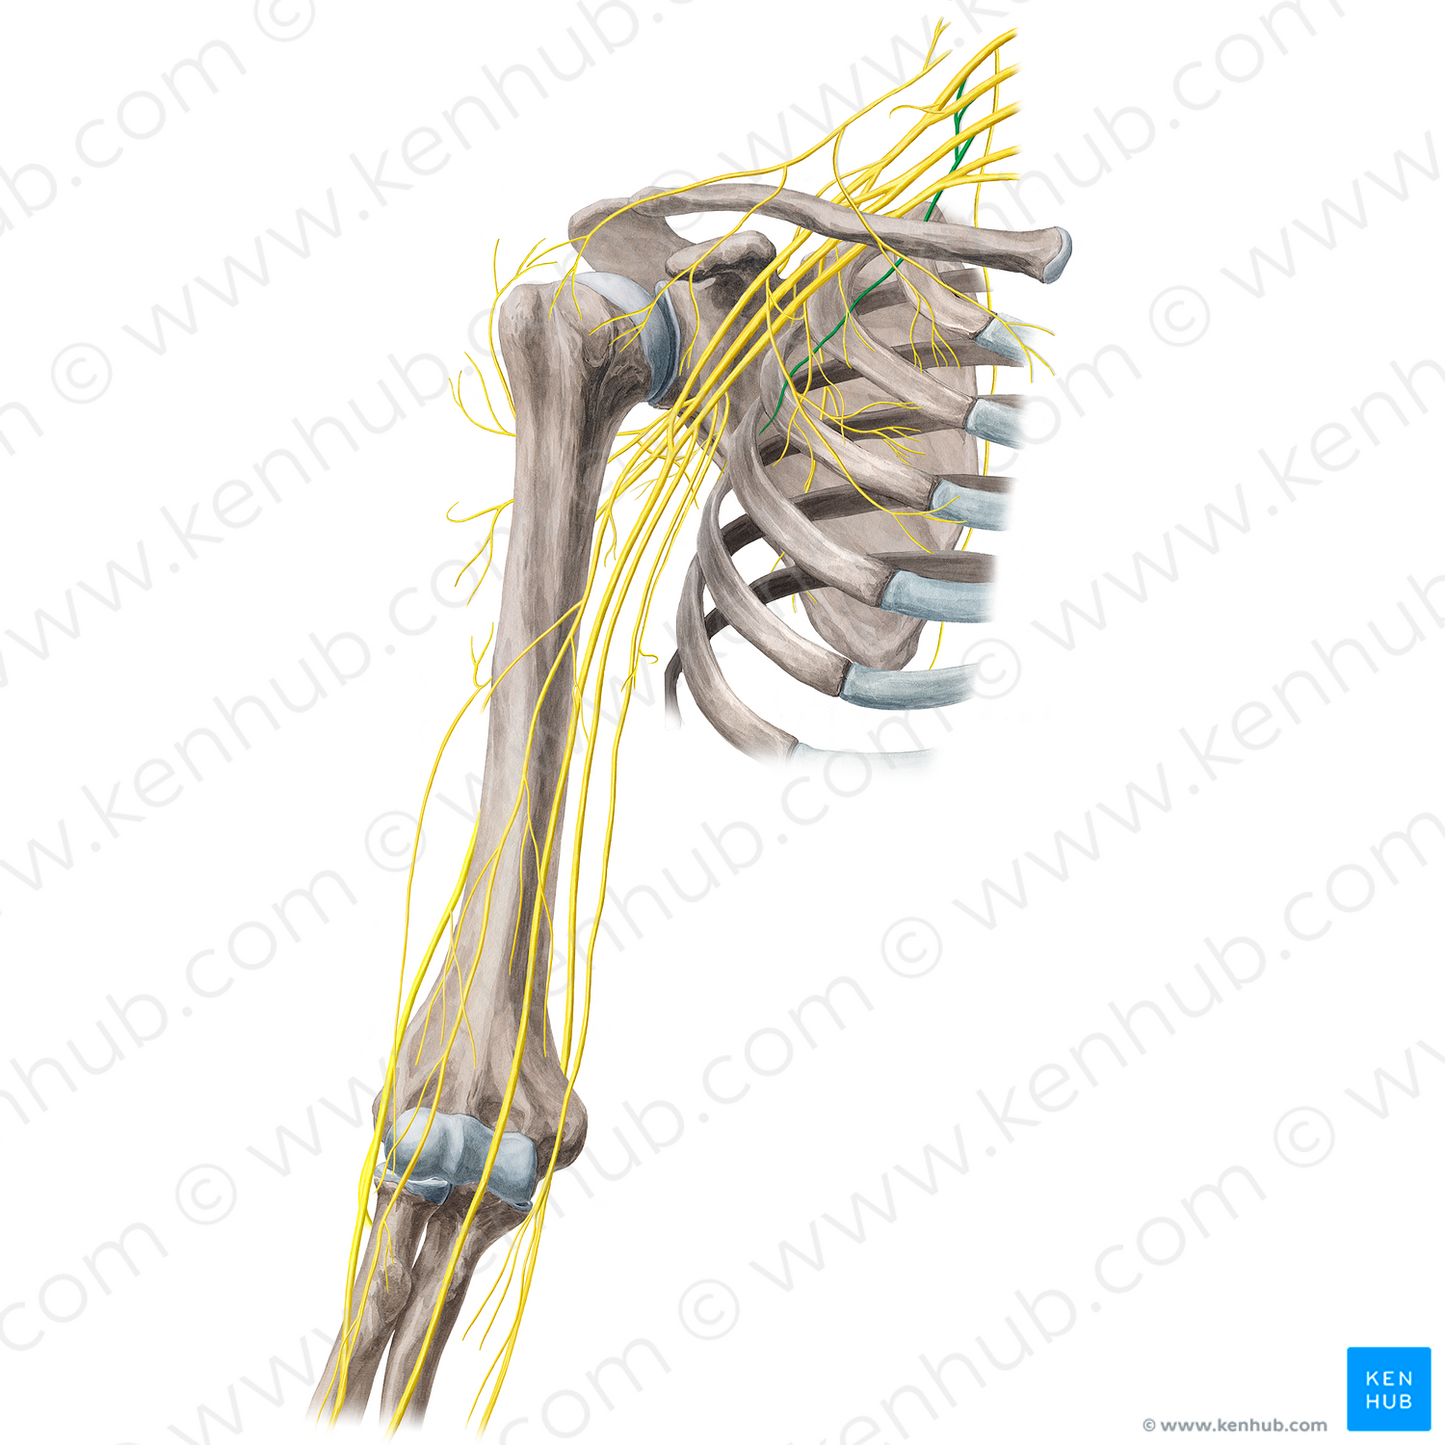 Long thoracic nerve (#6809)